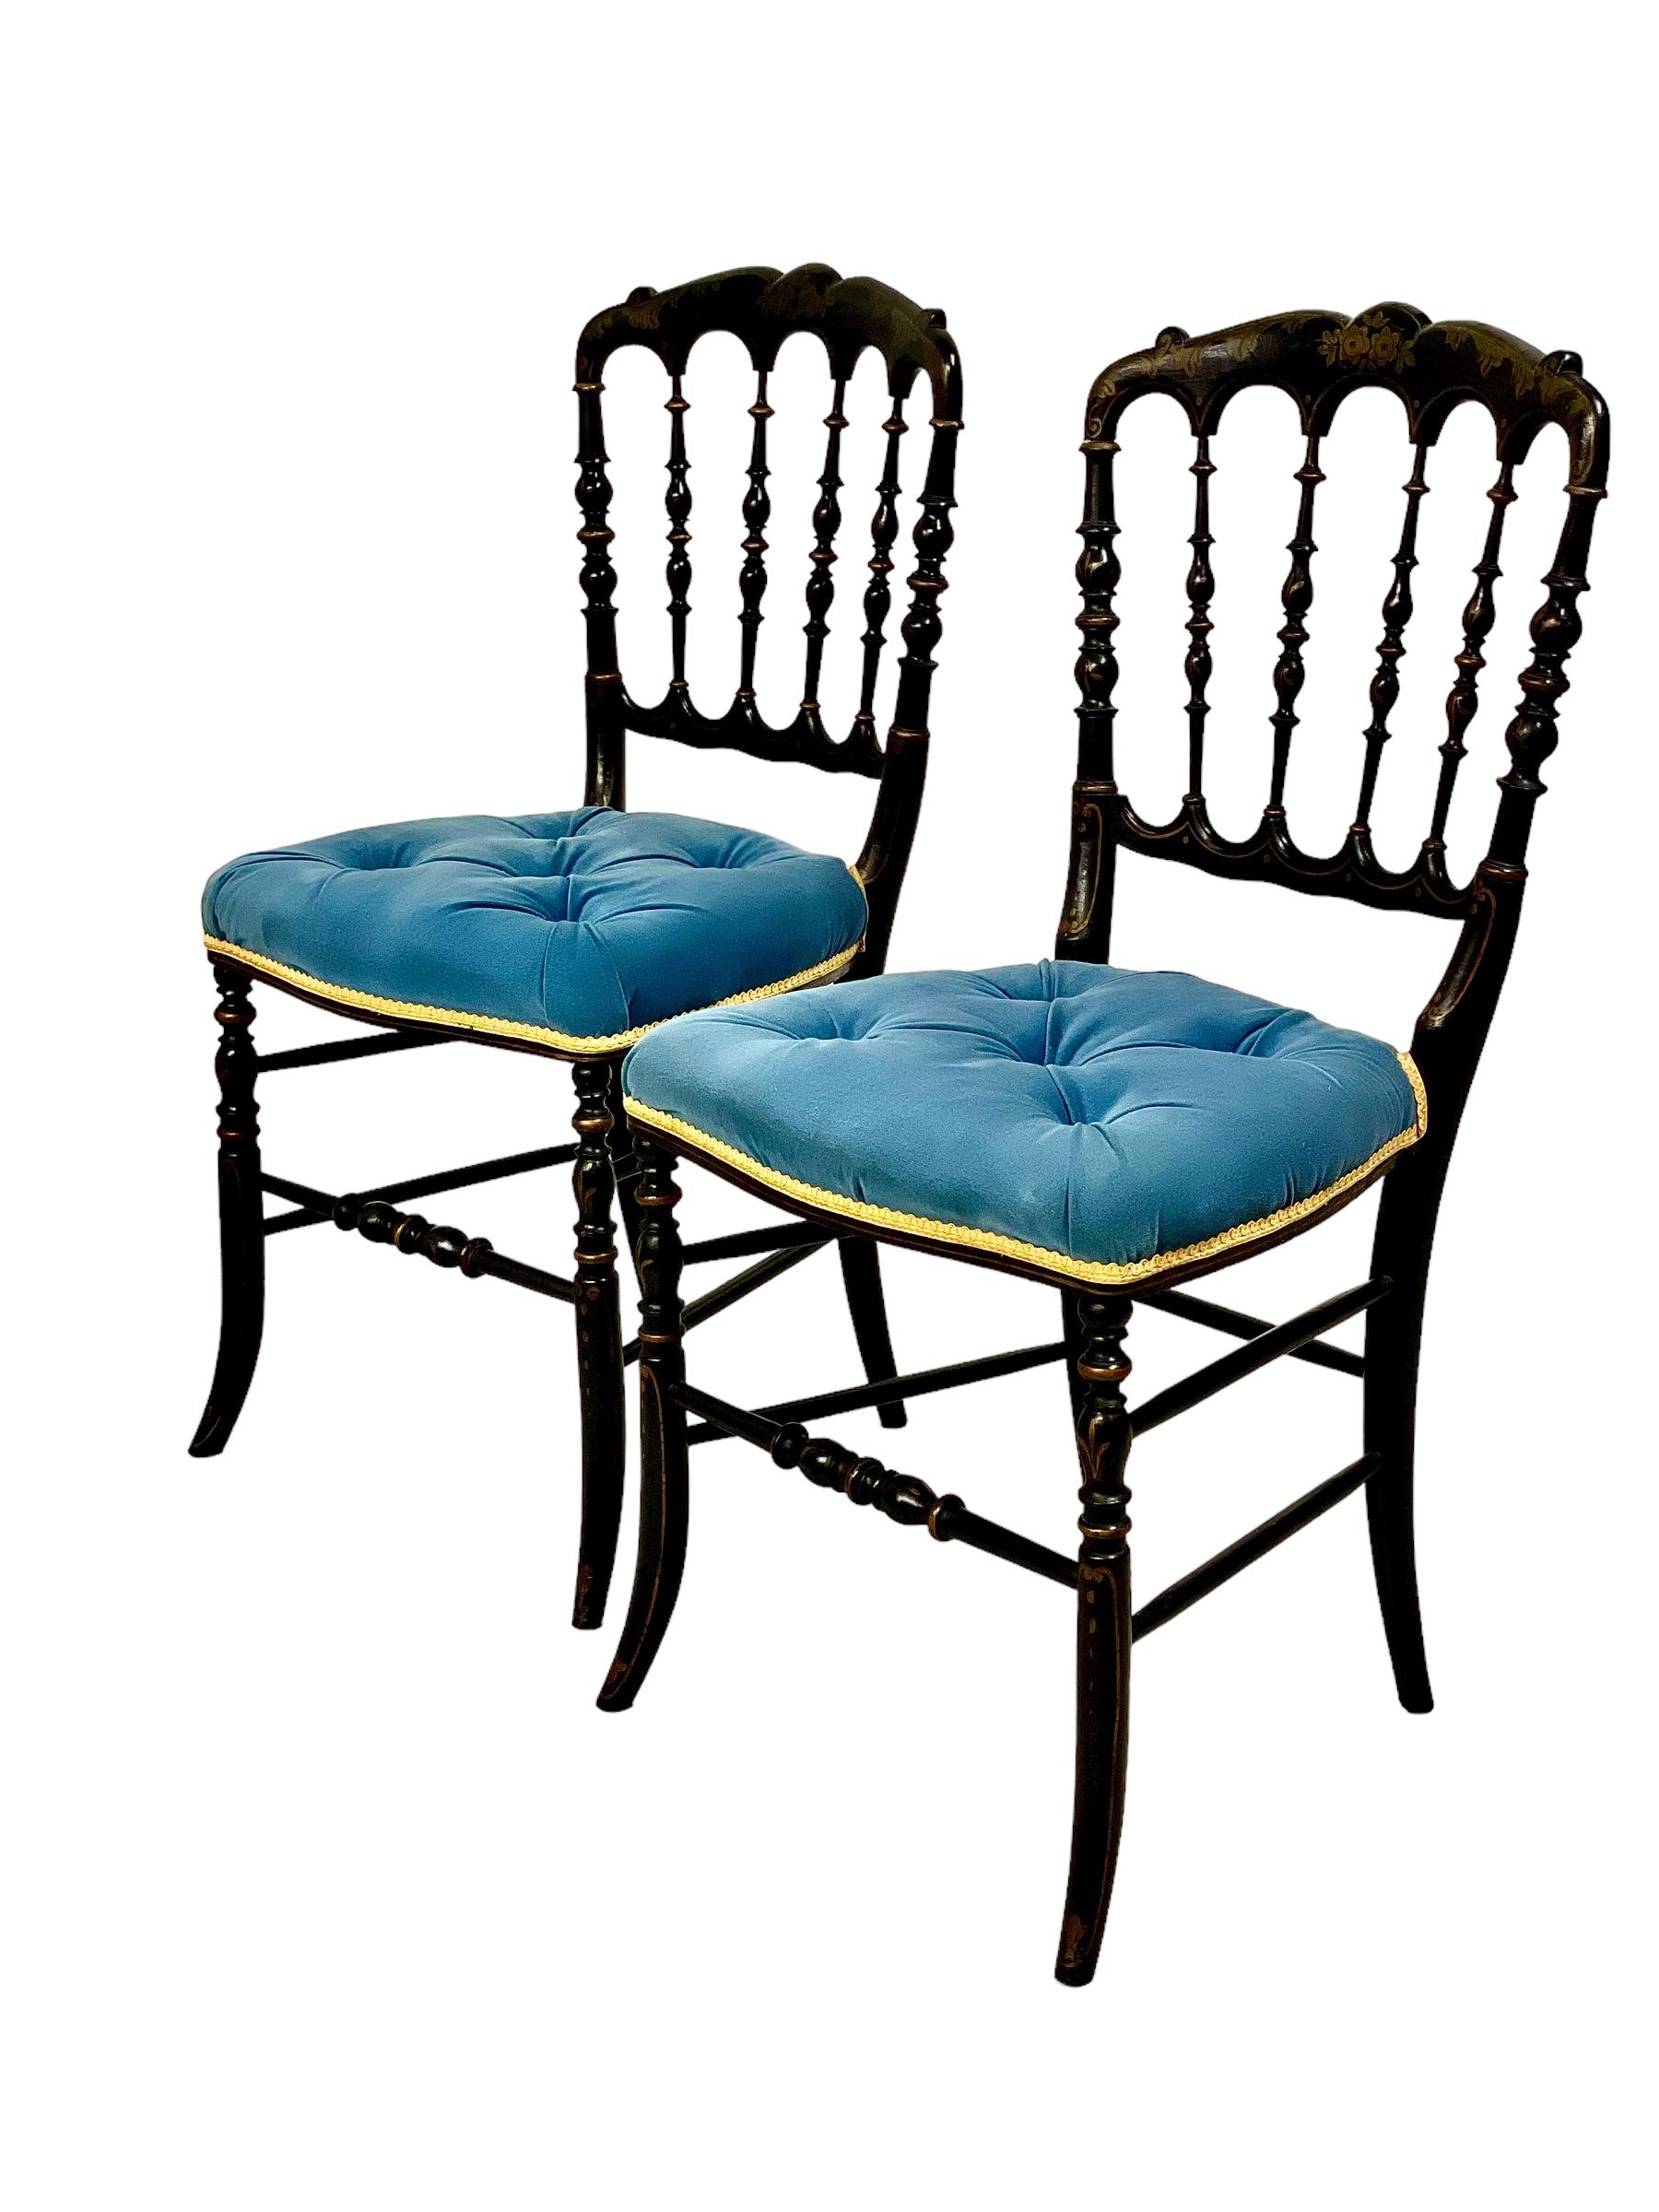 A gorgeous pair of 19th century Napoleon III opera chairs in ebonised wood, each with a wonderfully ornate spindle back and a gilded decoration of flowers and foliage on the top rail. A comfortable tufted seat in blue velvet is bound all round with